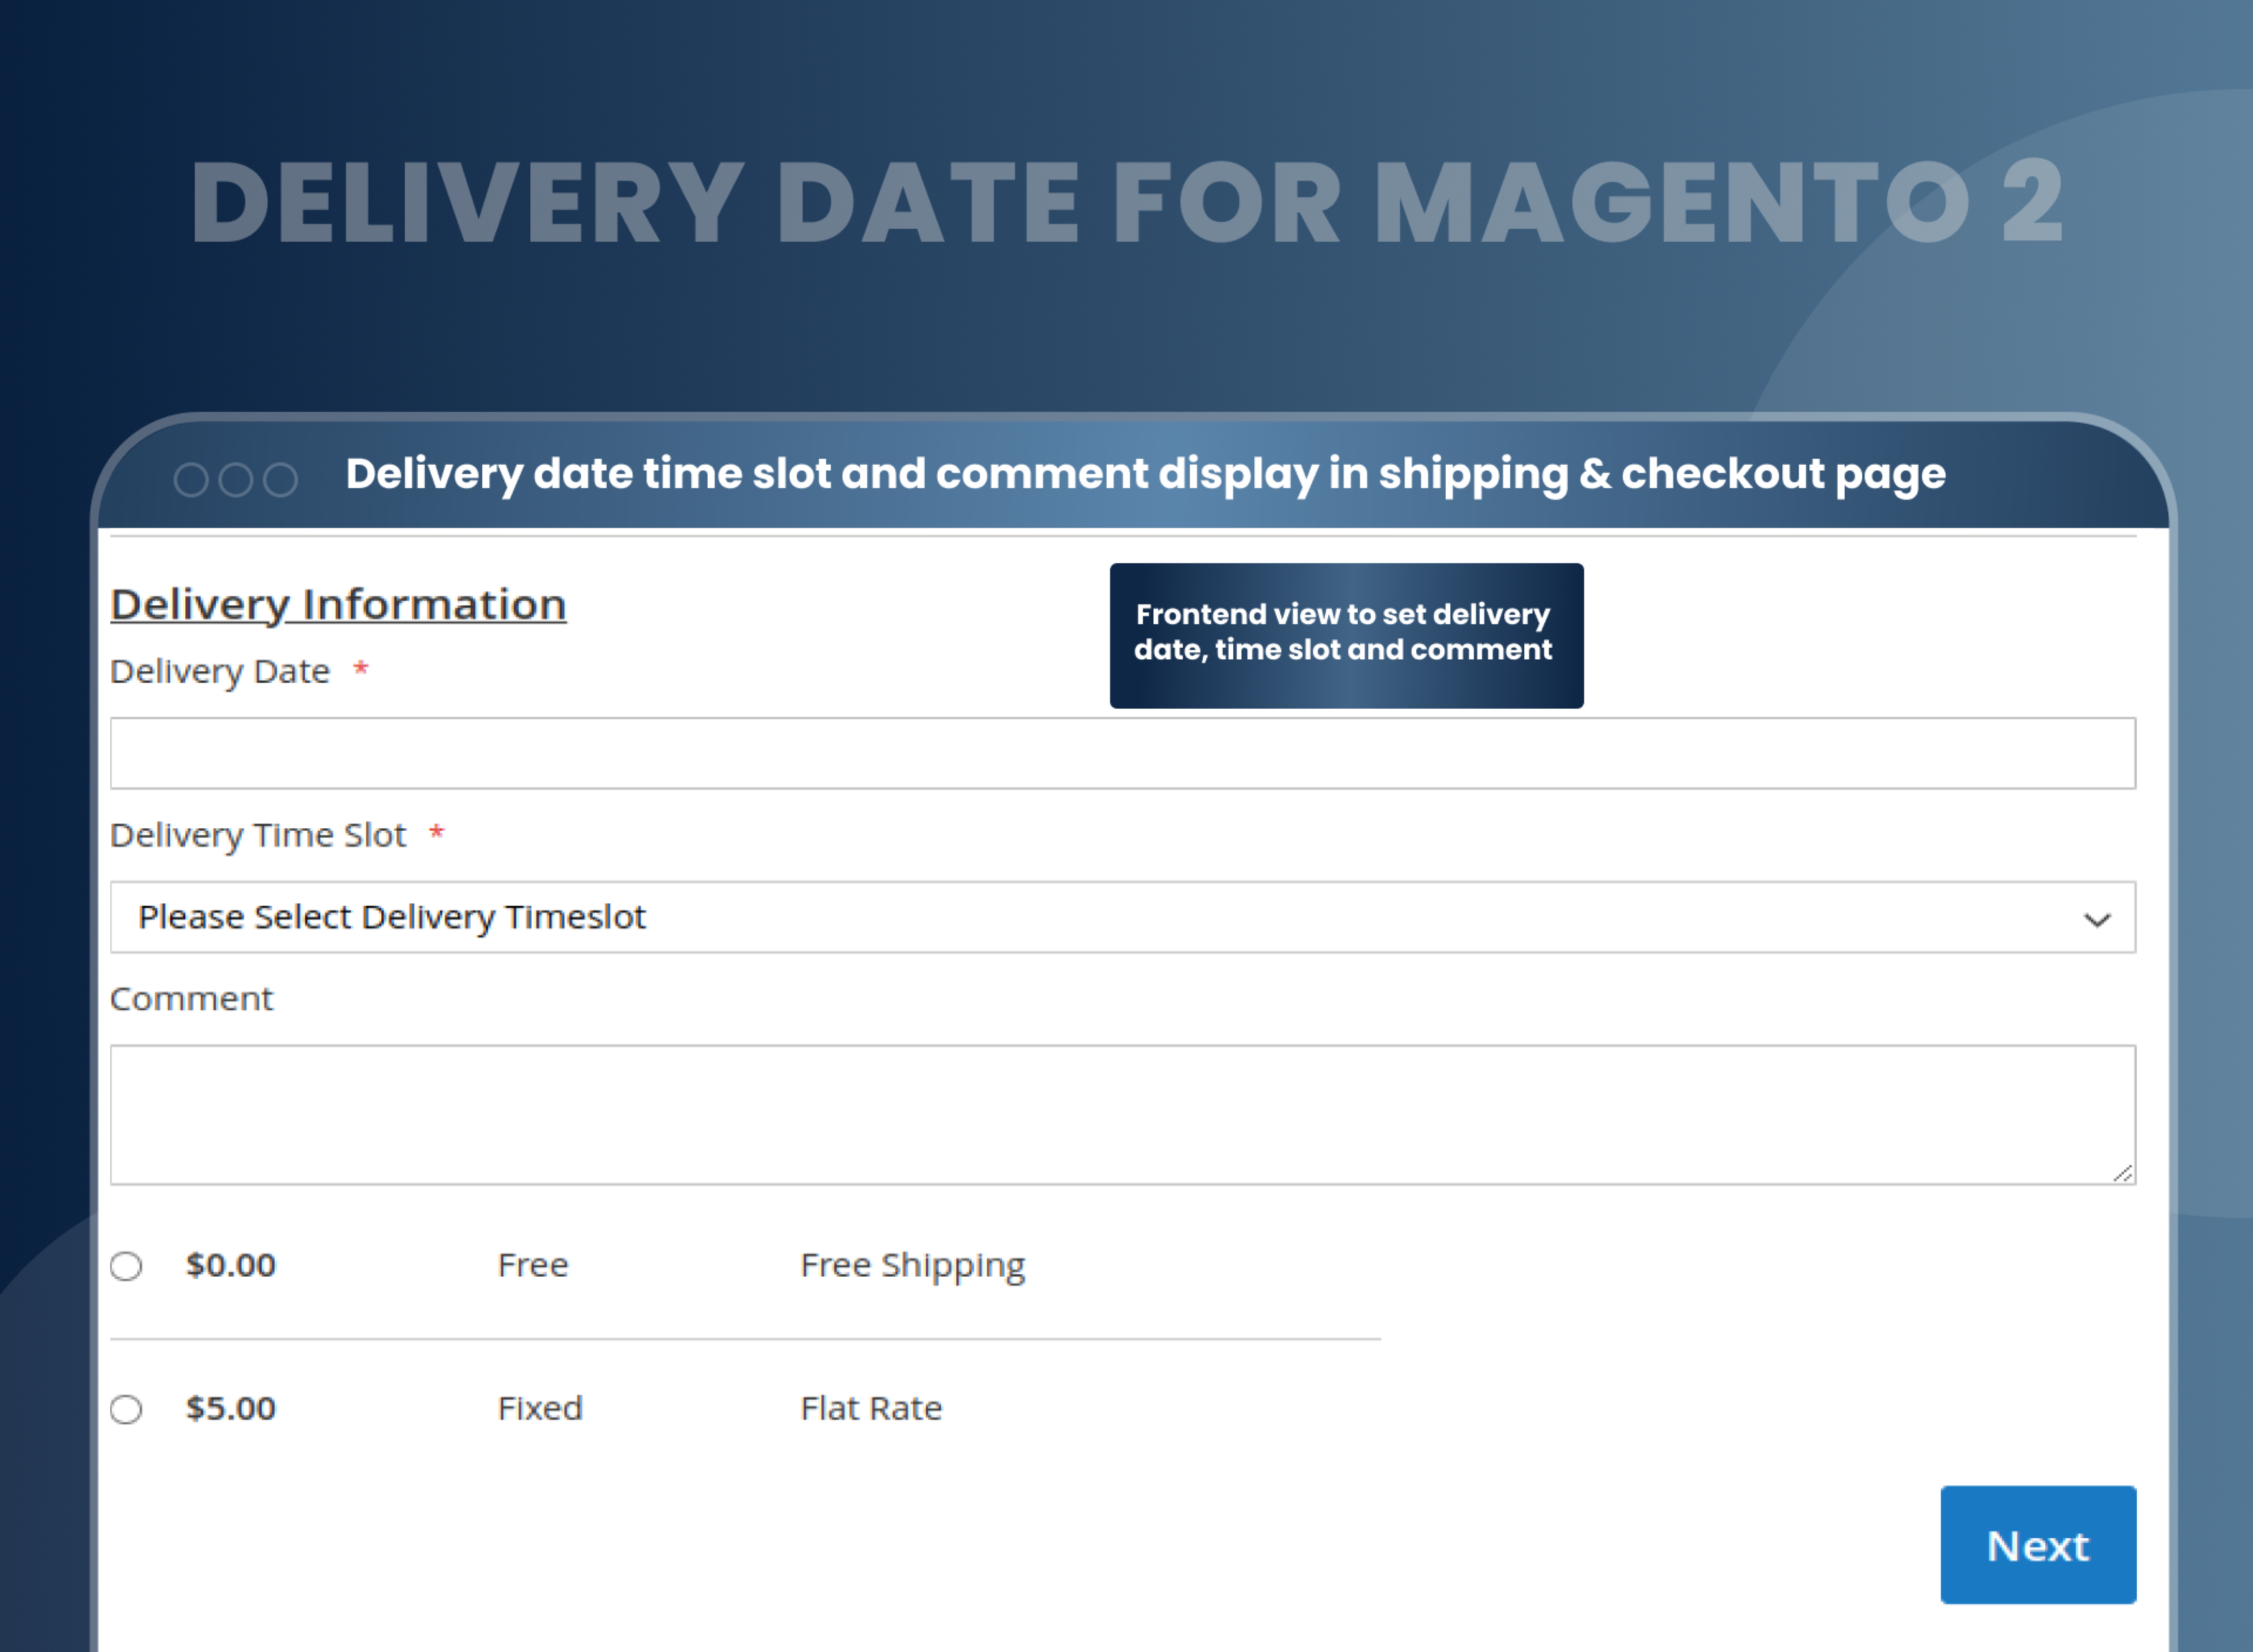  Delivery date time slot and comment display in shipping & checkout page